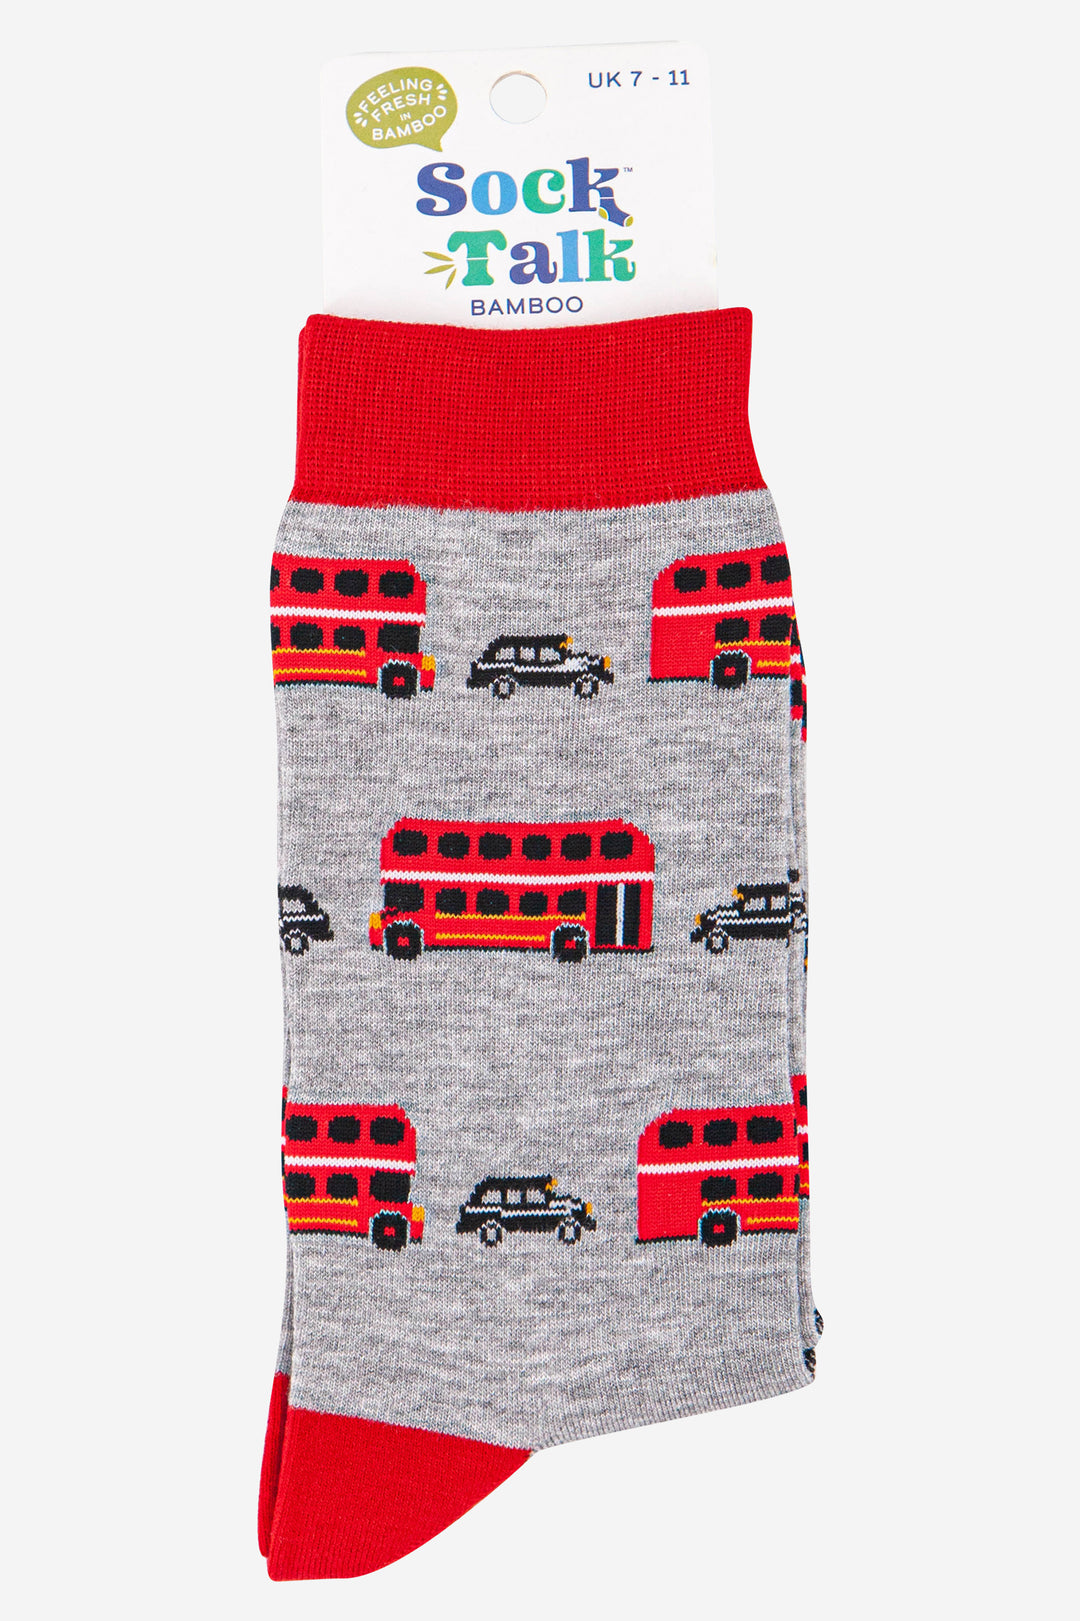 grey and red bamboo socks with red buses and black cabs in uk size 7-11